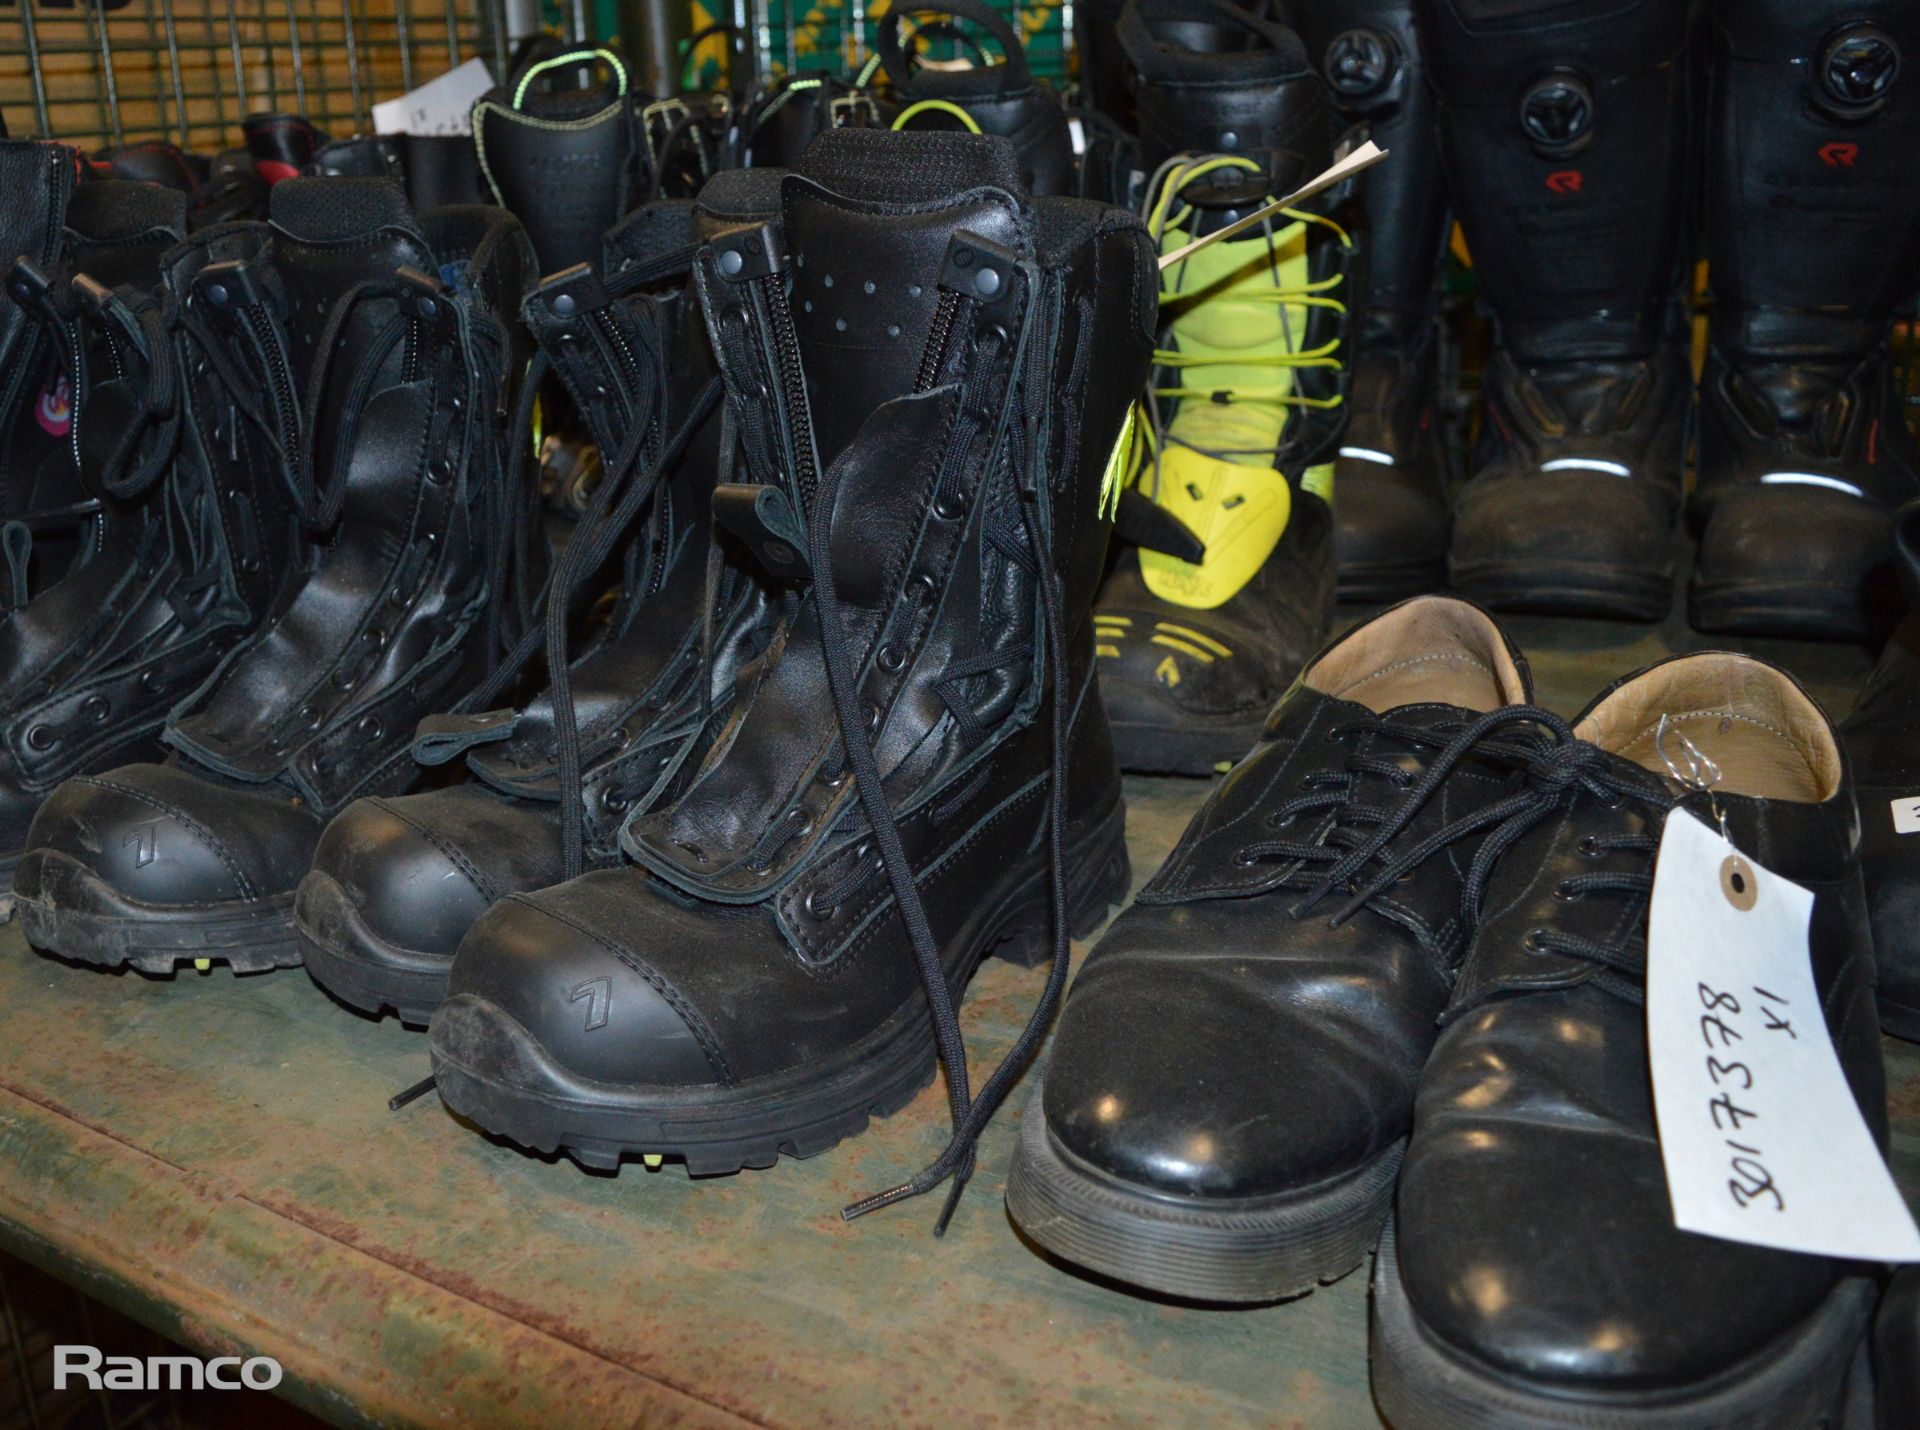 11 pairs of Protective boots - various styles / makes / sizes, Black shoes - various sizes, Wellies - Image 2 of 4